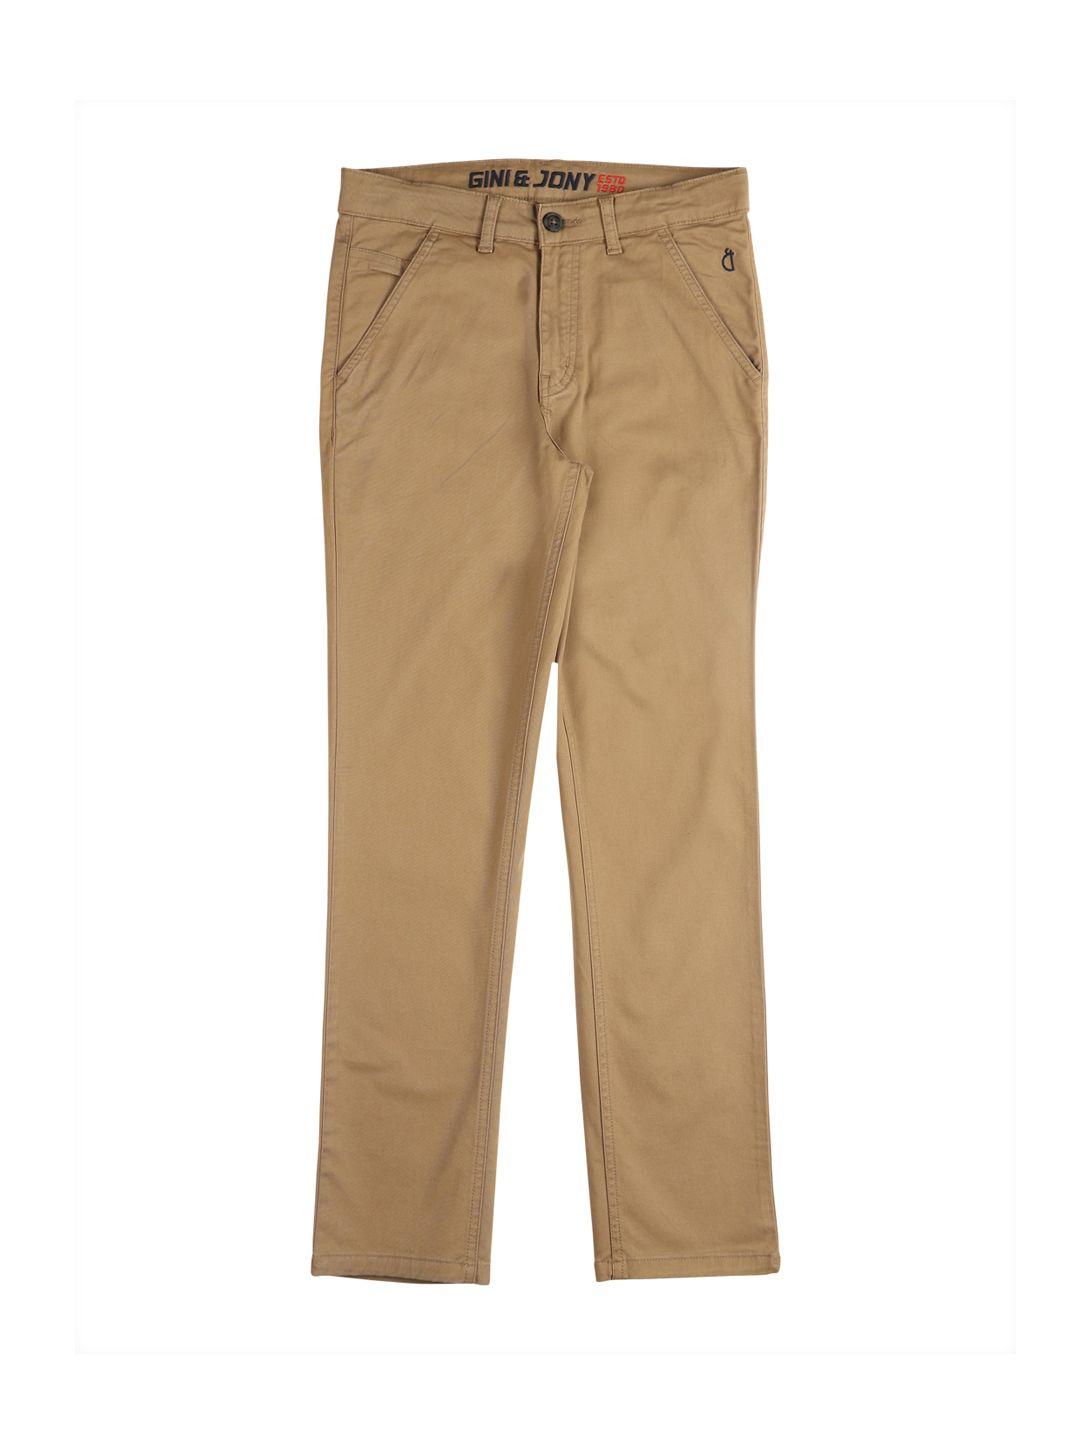 gini and jony boys mid-rise cotton trousers